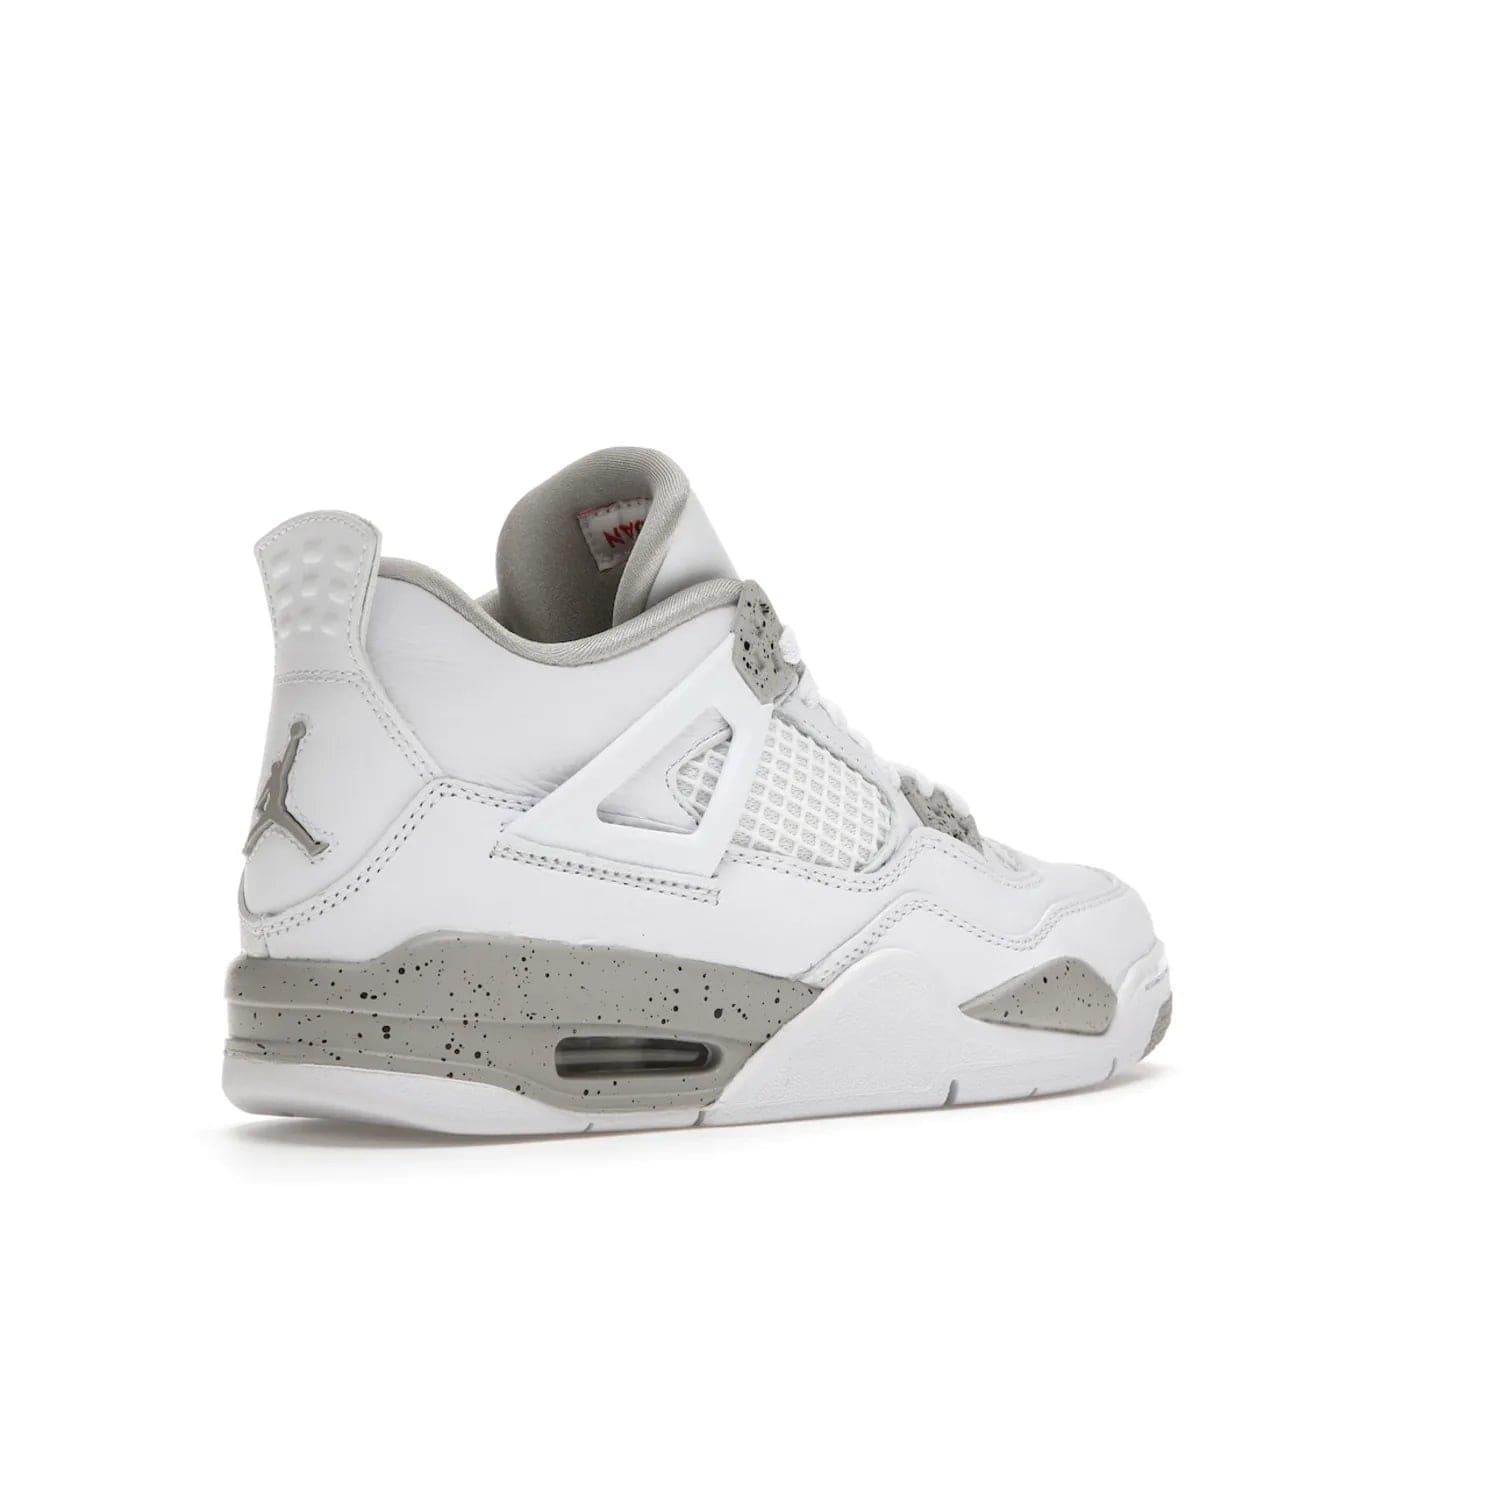 Jordan 4 Retro White Oreo (2021) (GS) - Image 33 - Only at www.BallersClubKickz.com - White Oreo Air Jordan 4 Retro 2021 GS - Iconic sneaker silhouette with white canvas upper, Tech Grey detailing, and Fire Red accents. Available July 2021.